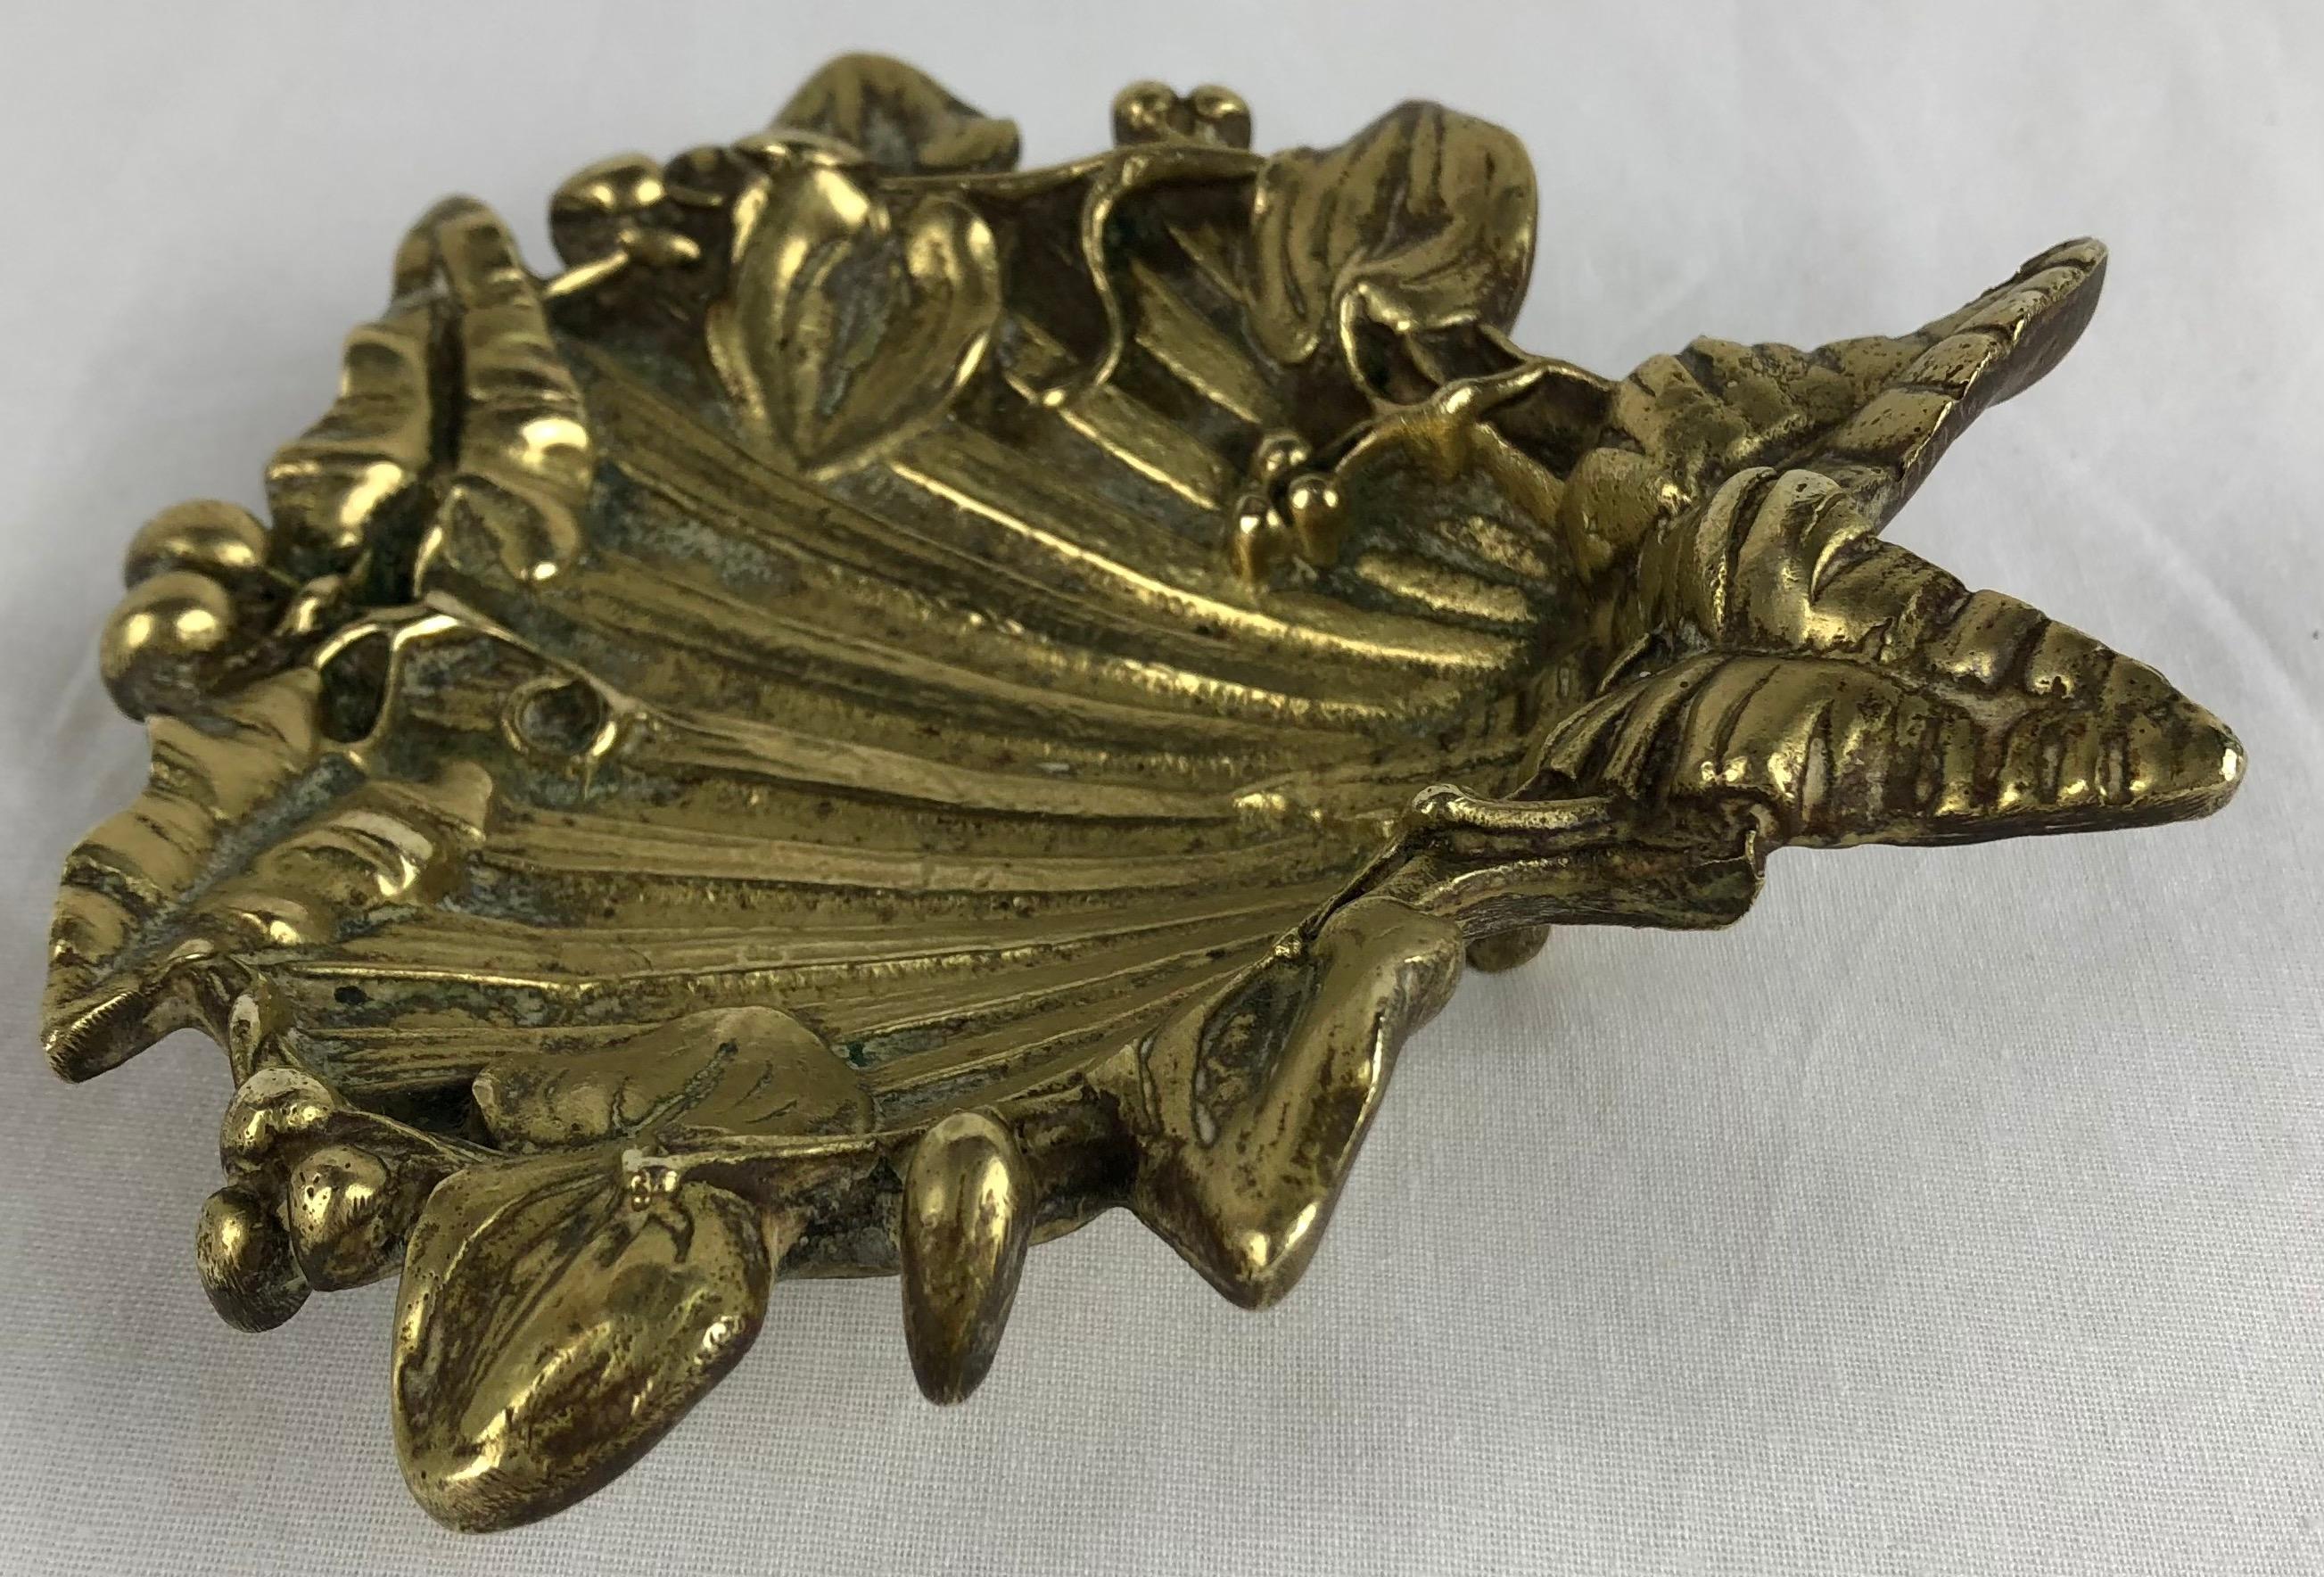 20th Century Stunning French Art Nouveau Bronze Key Bowl or Vide Poche, Signed A. Remy Ets.